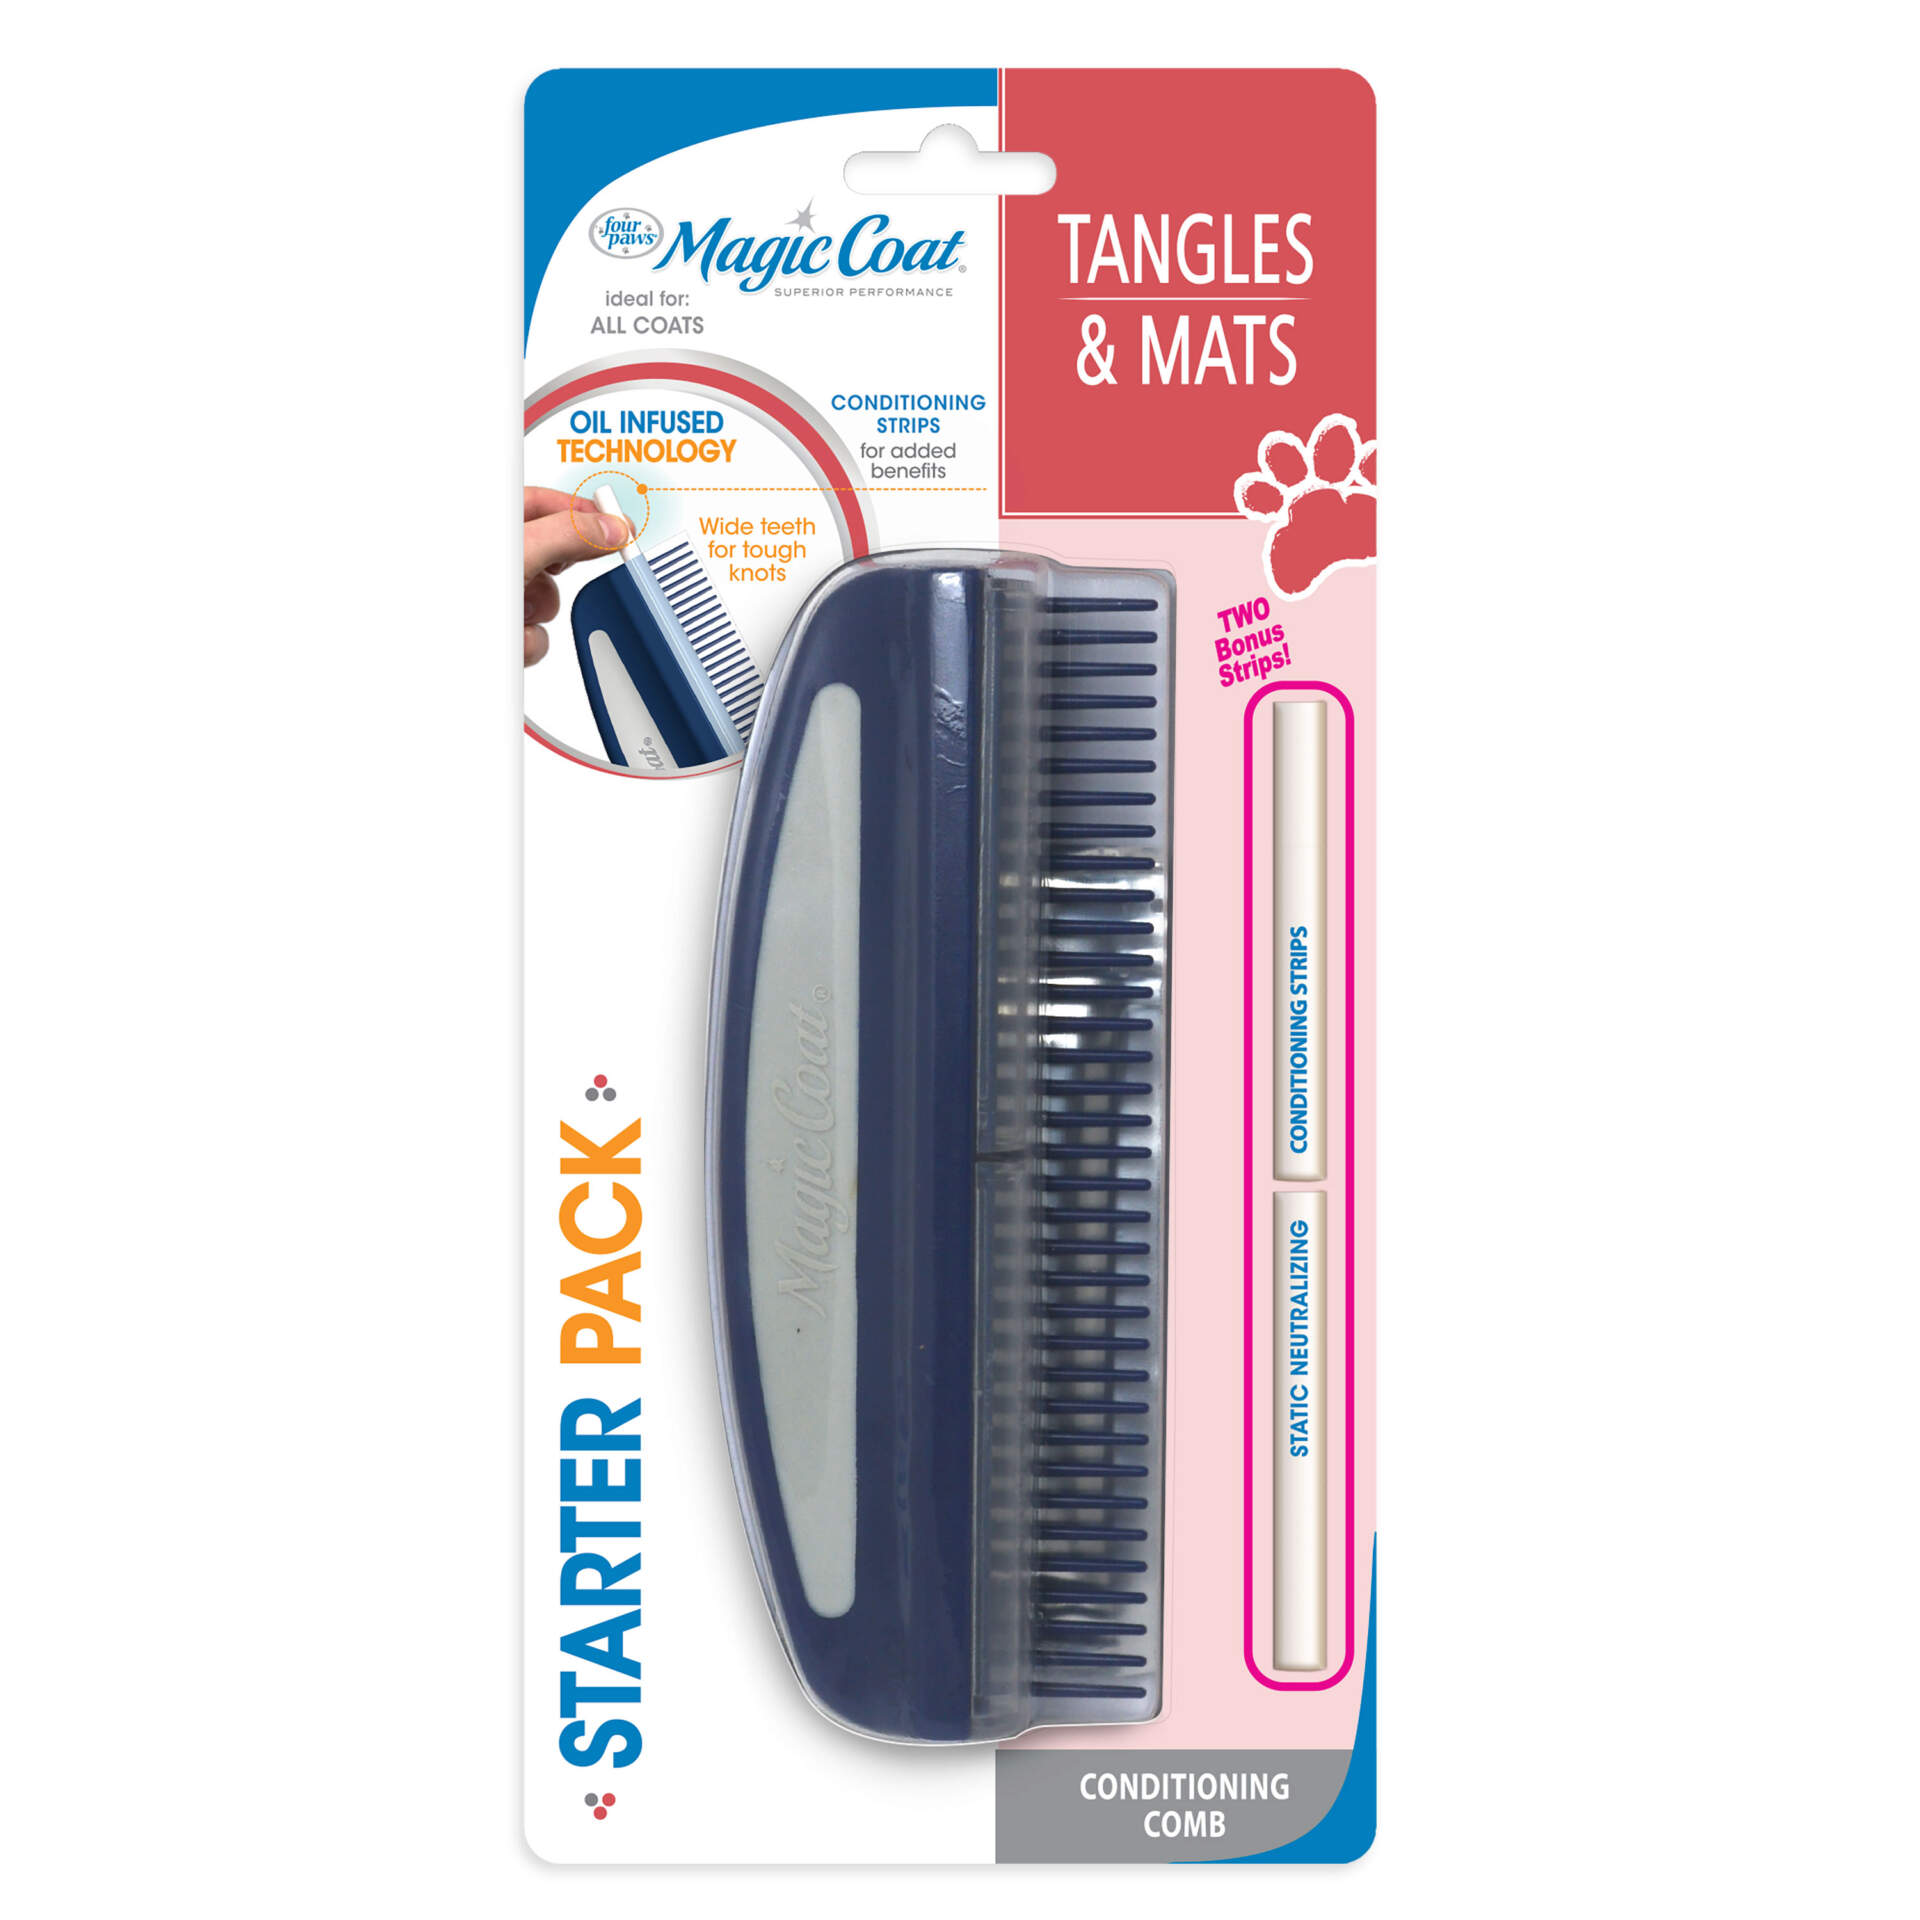 045663973162-magic-coat-dog-conditioning-grooming-comb-in-packaging-front